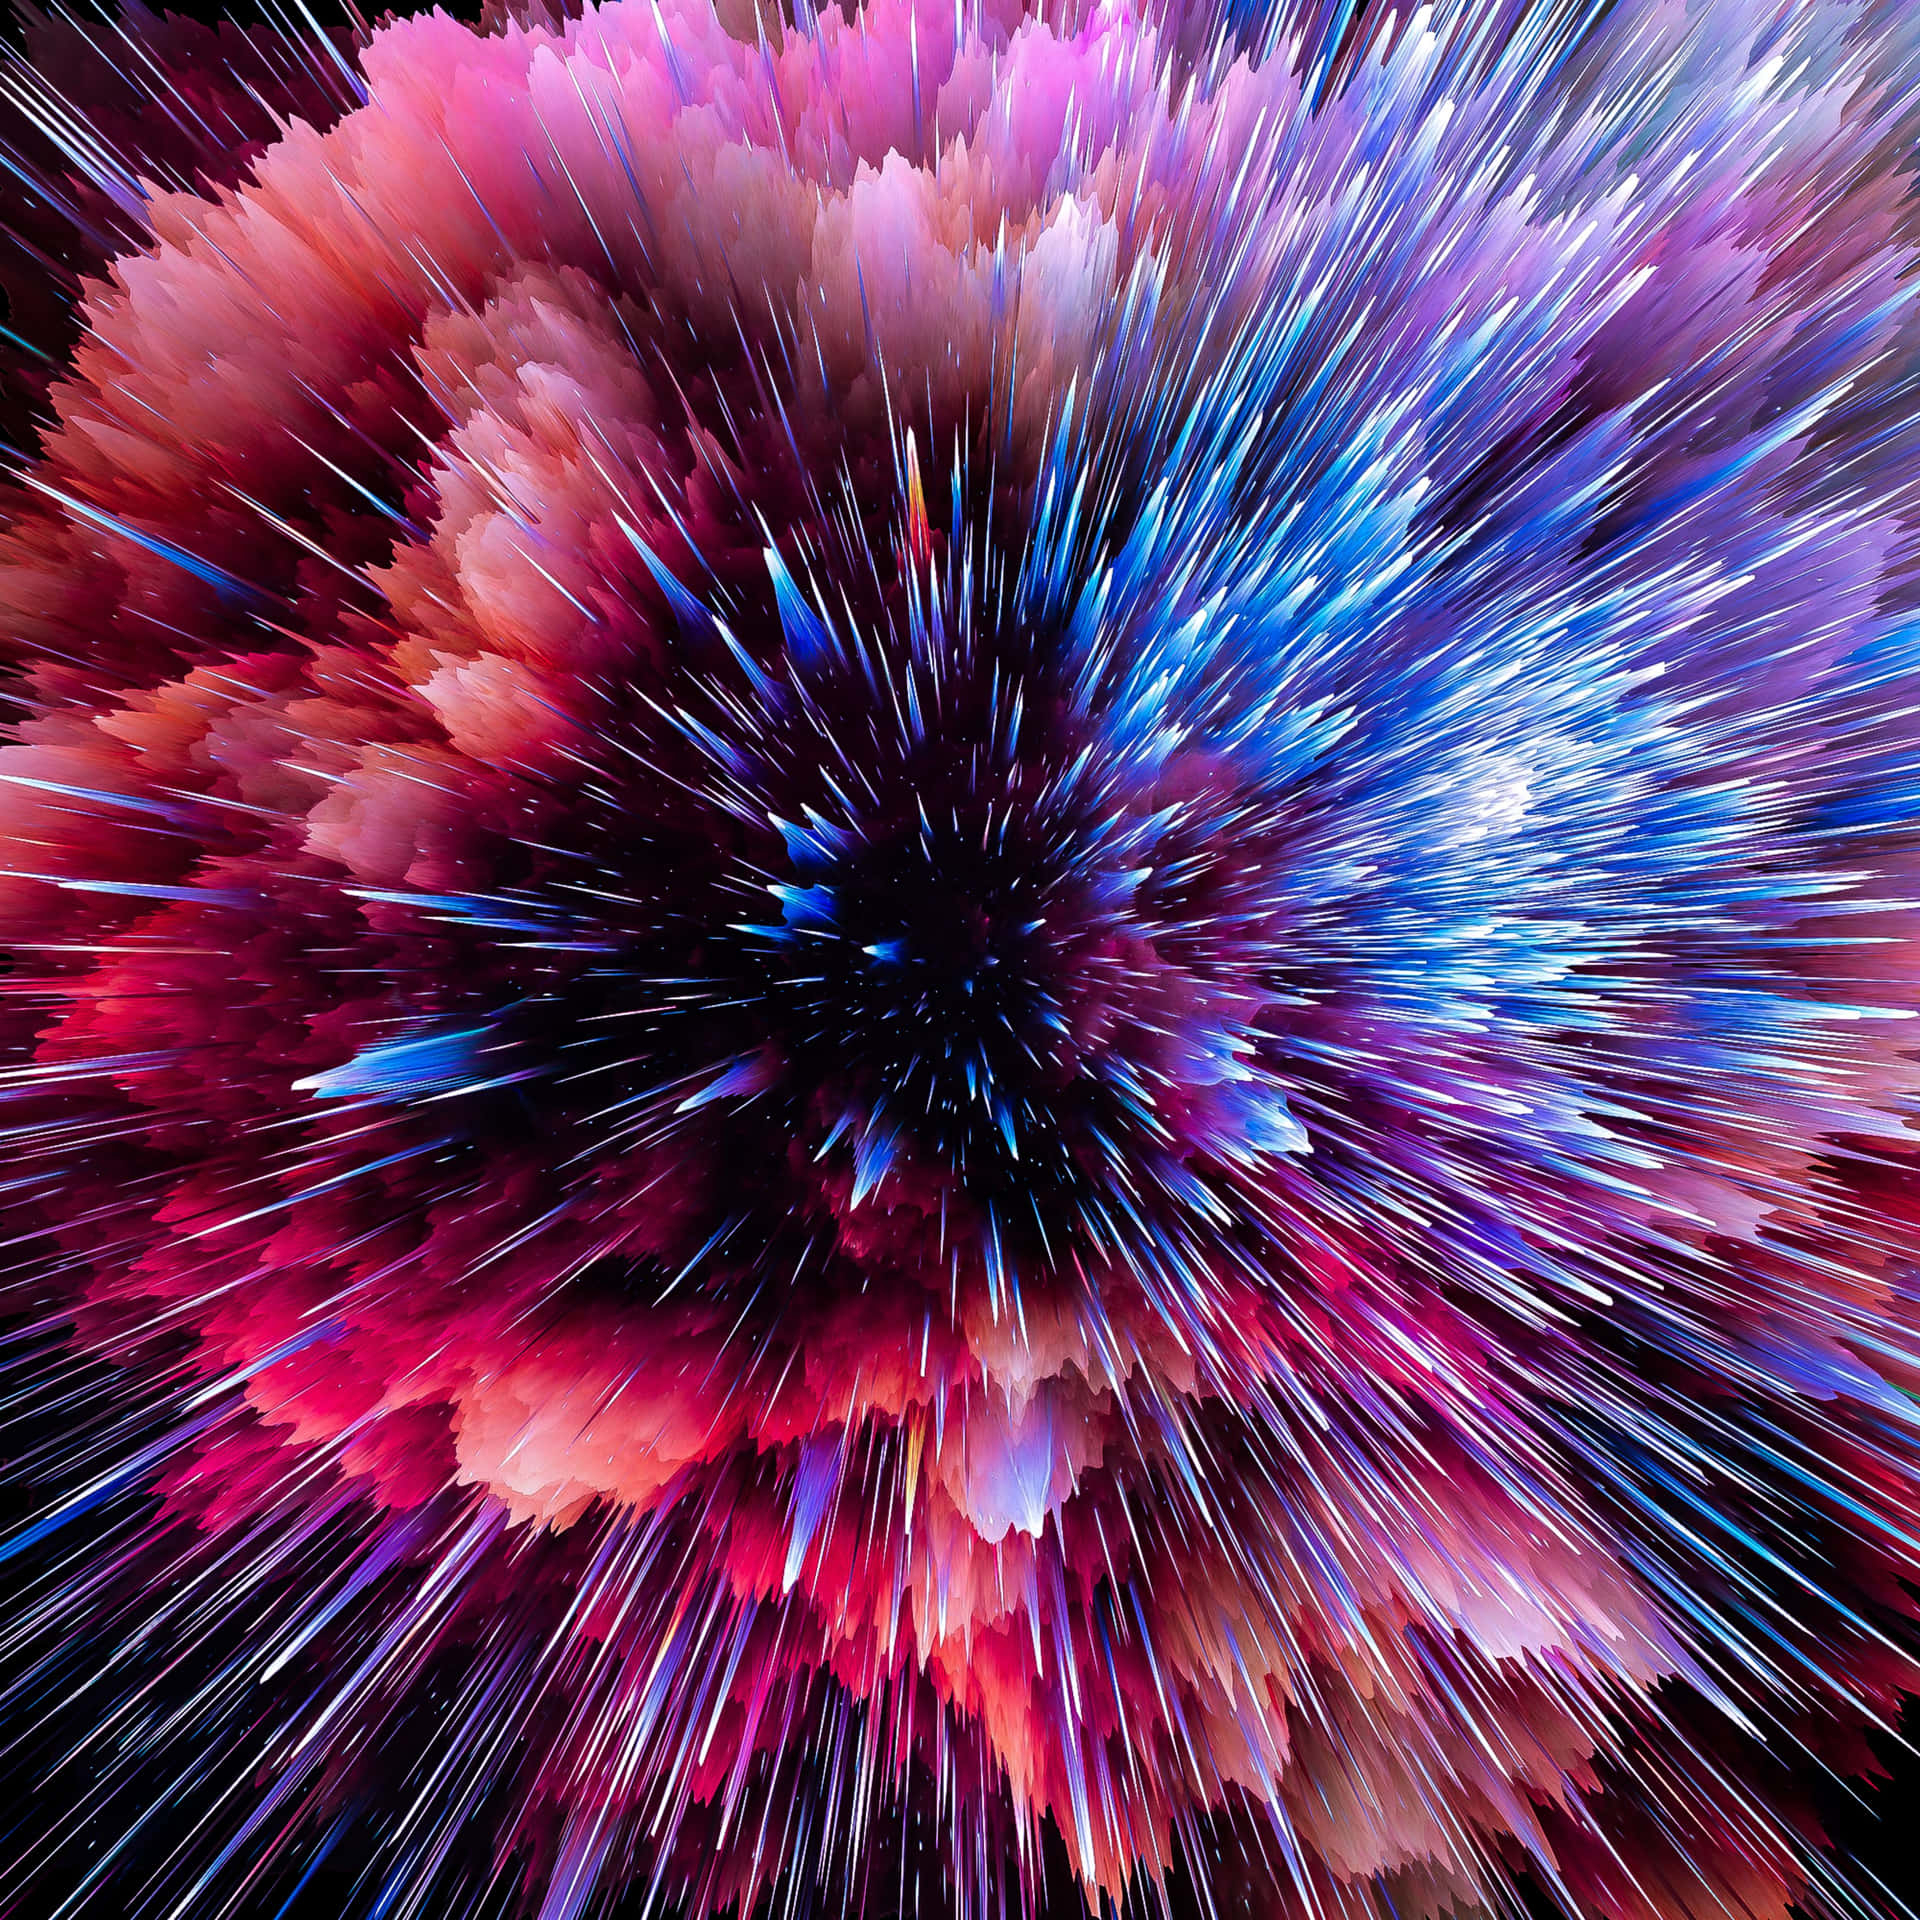 A Colorful Explosion Of Light